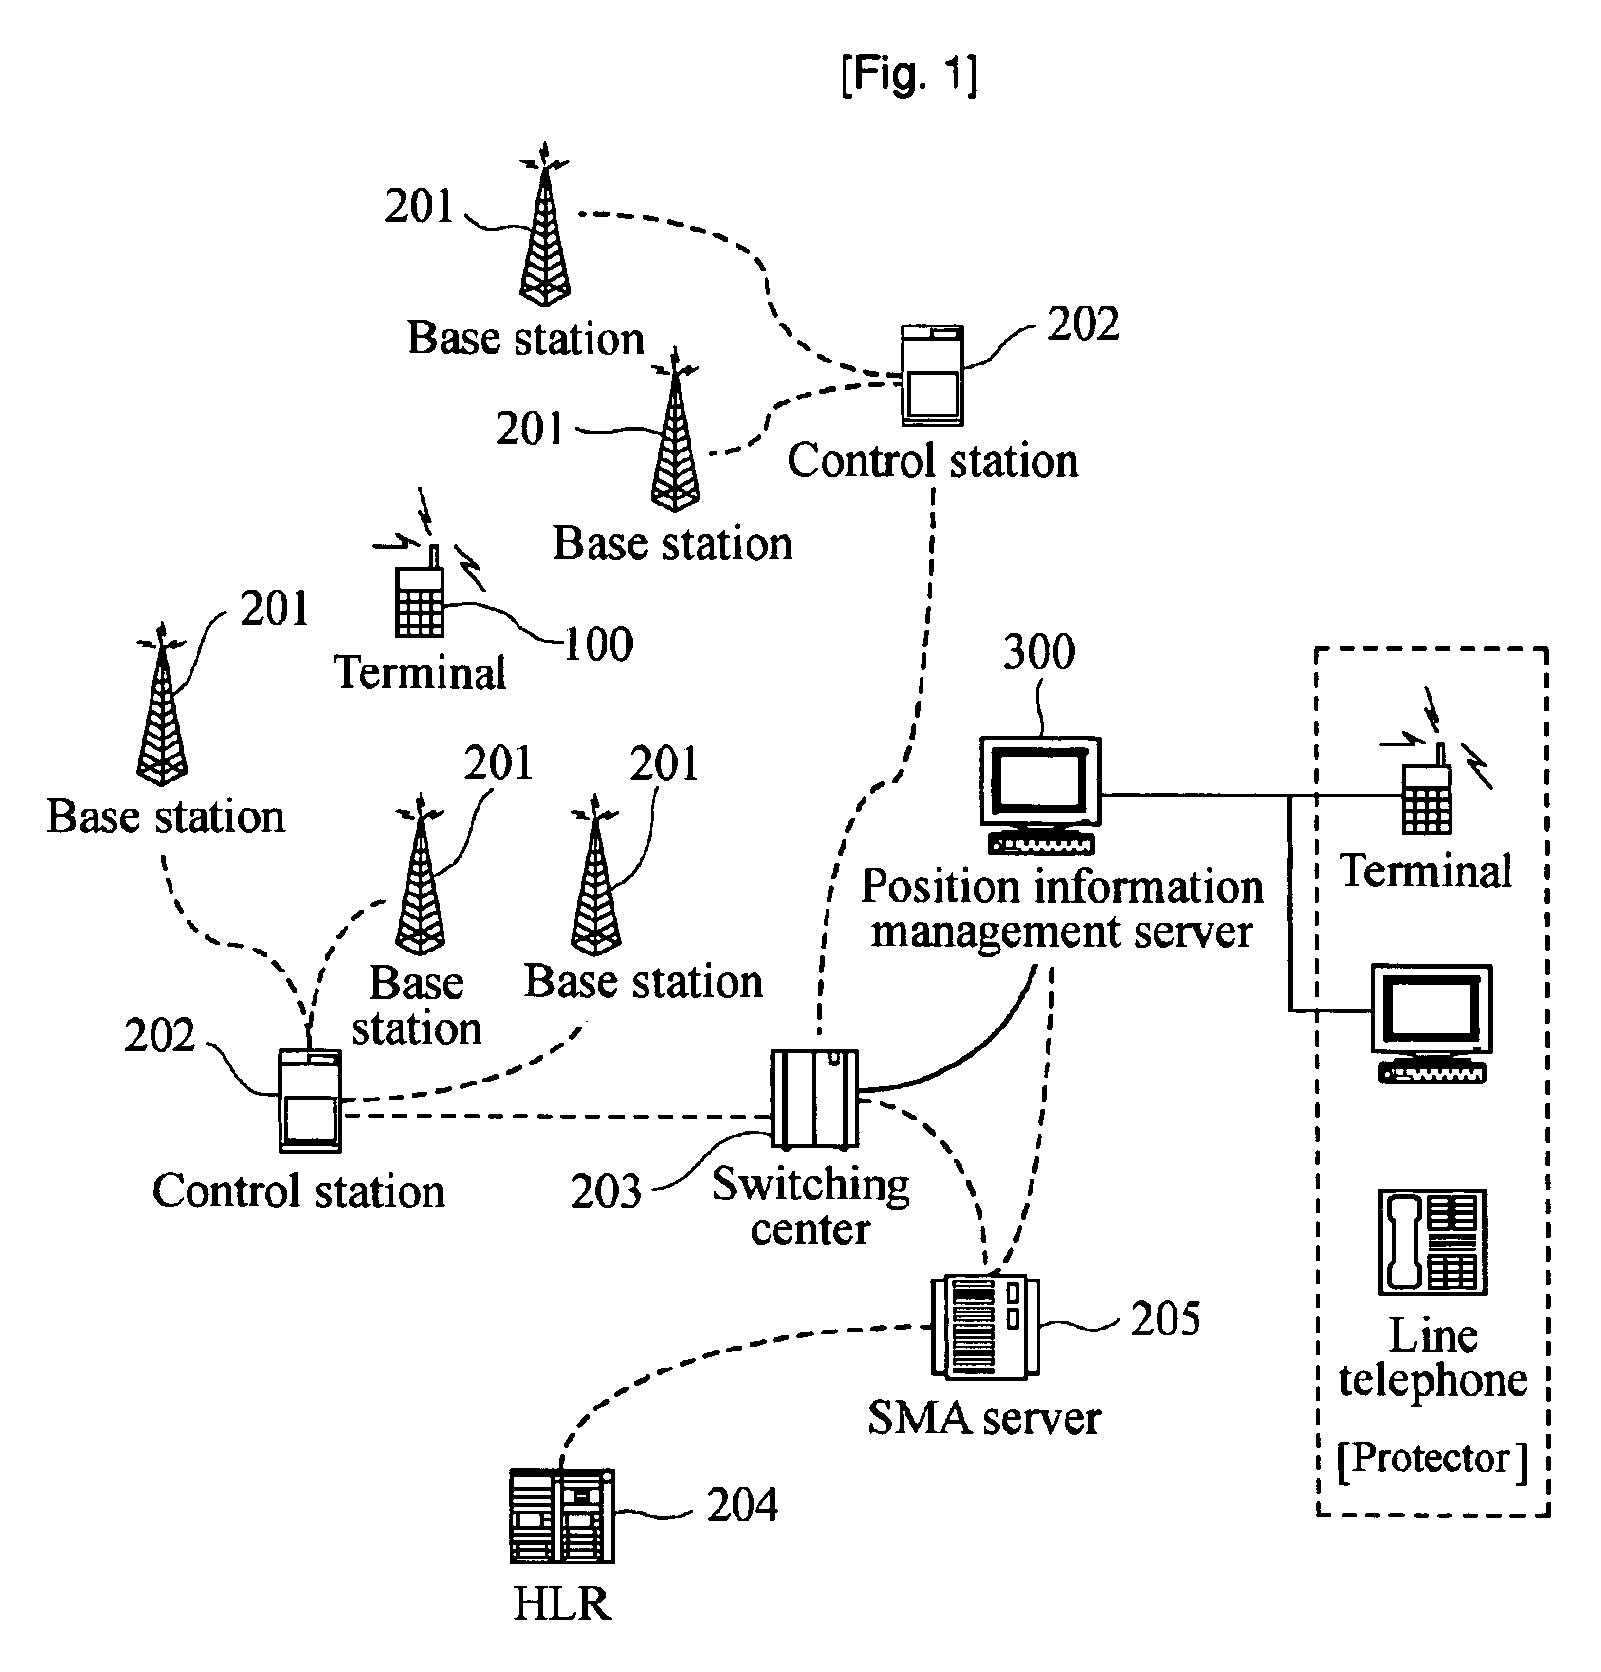 Apparatus And Method For Tracking The Position Of A Person/Object Using A Mobile Communication Network